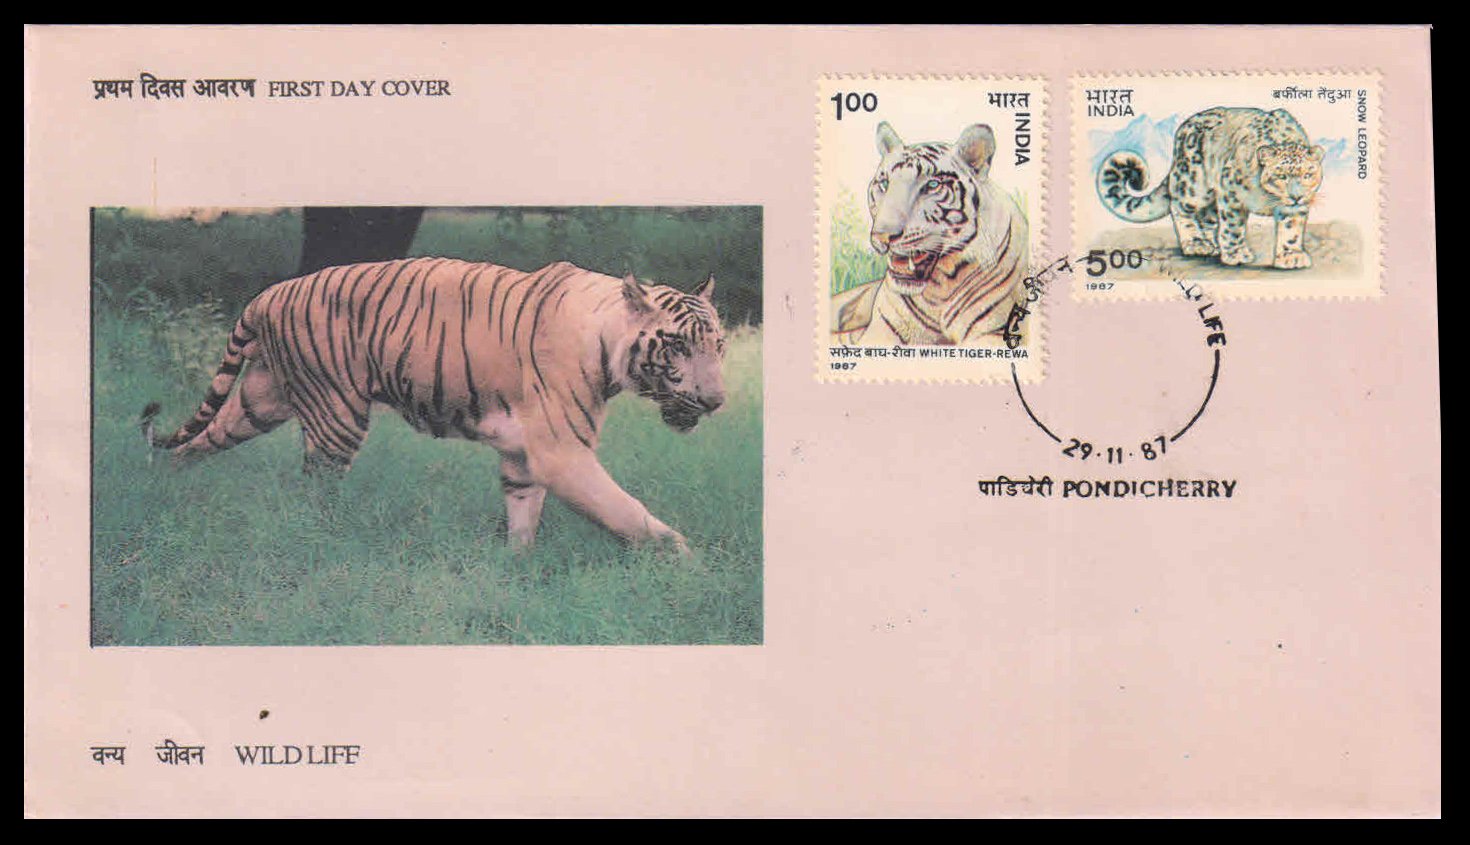 INDIA 1987 - Wildlife, White Tiger and Snow Leopard, Set of 2 Stamps on First Day Cover, Good Condition